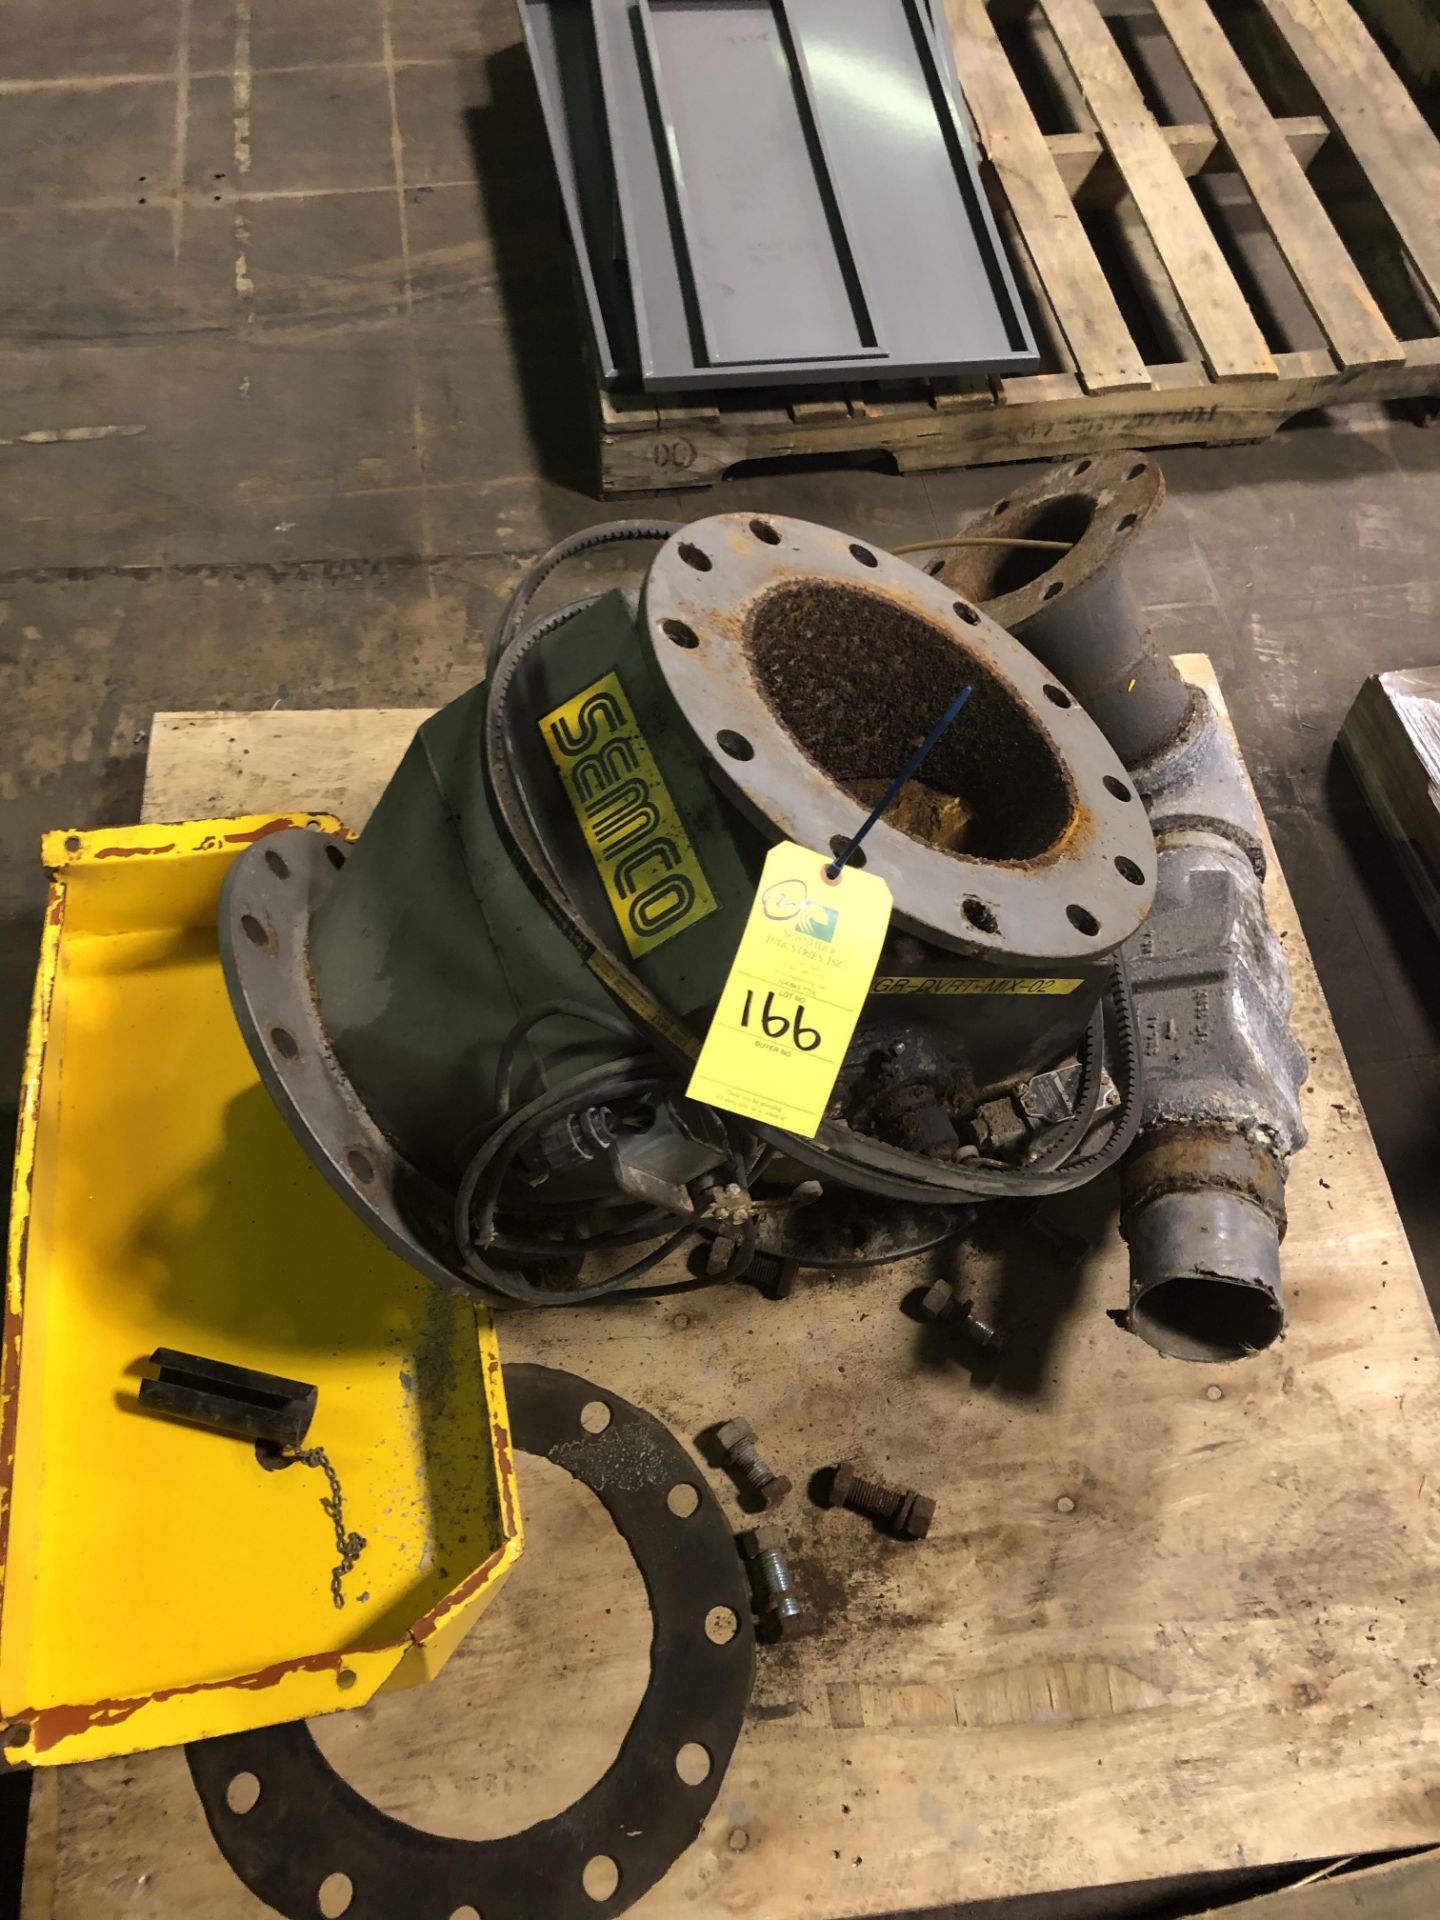 Semco Model #GD-10 Rotary Valve, Includes Assorted Components, RIGGING FEE - $50 - Image 2 of 3